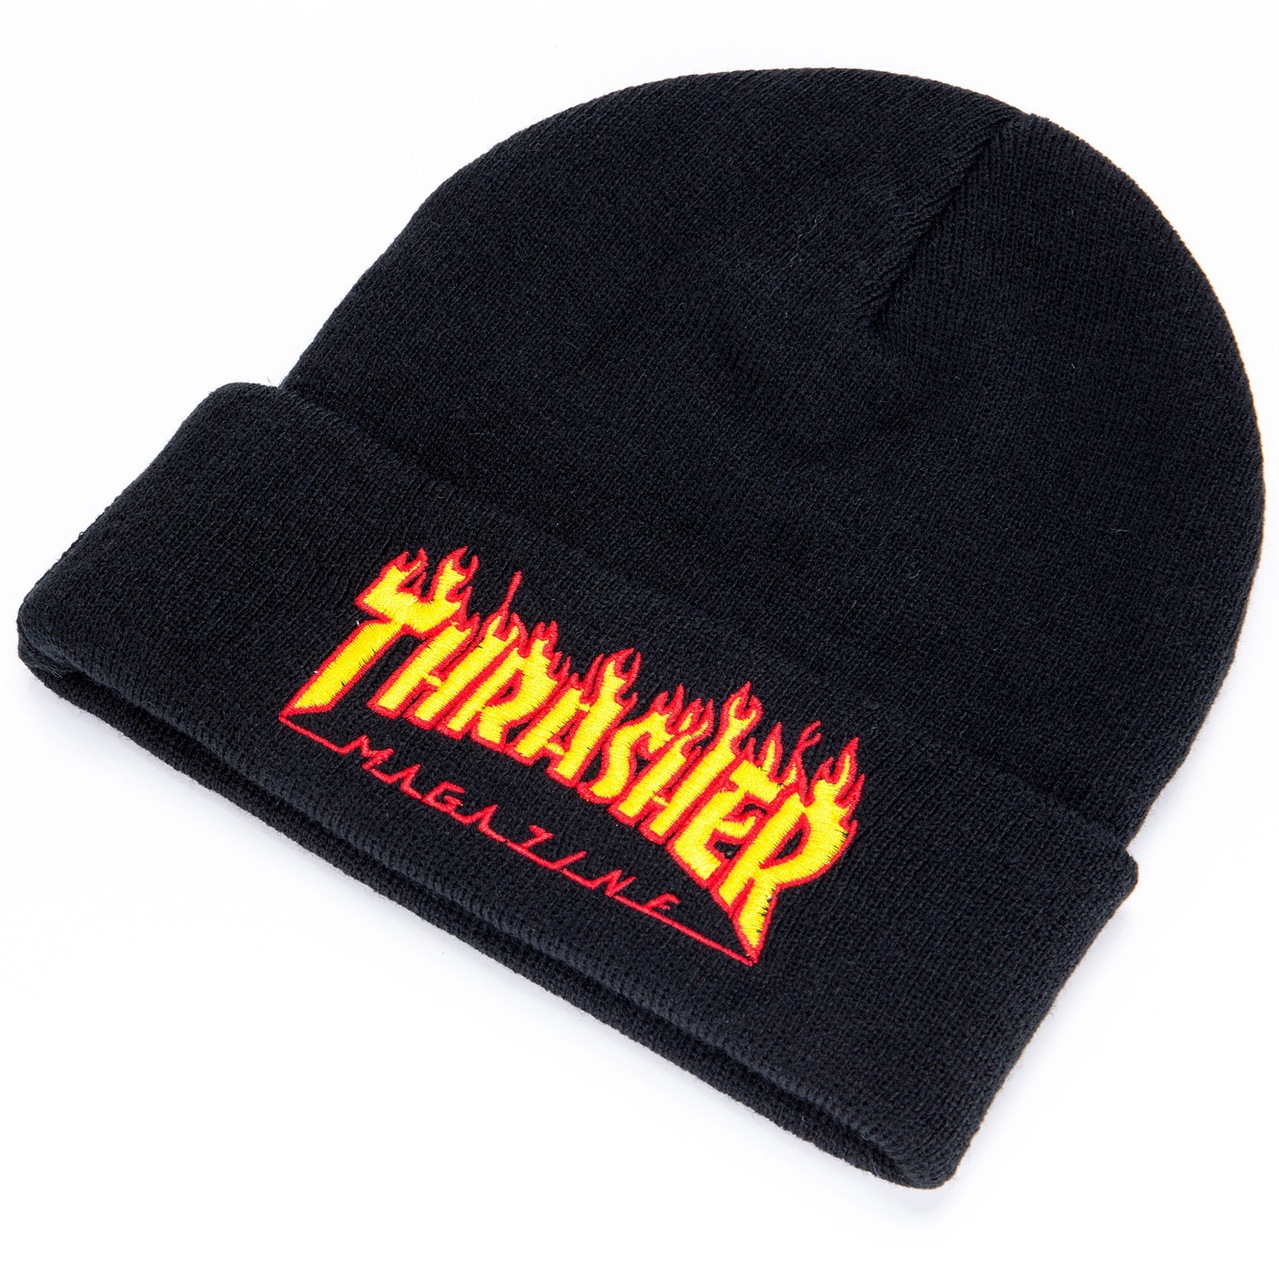 Thrashe Flame Three-Dimensional Embroidery Knitted Hat Men's and Women's Outdoor Cold-Resistant Woolen Cap Autumn and Winter Skateboard Sports Cap